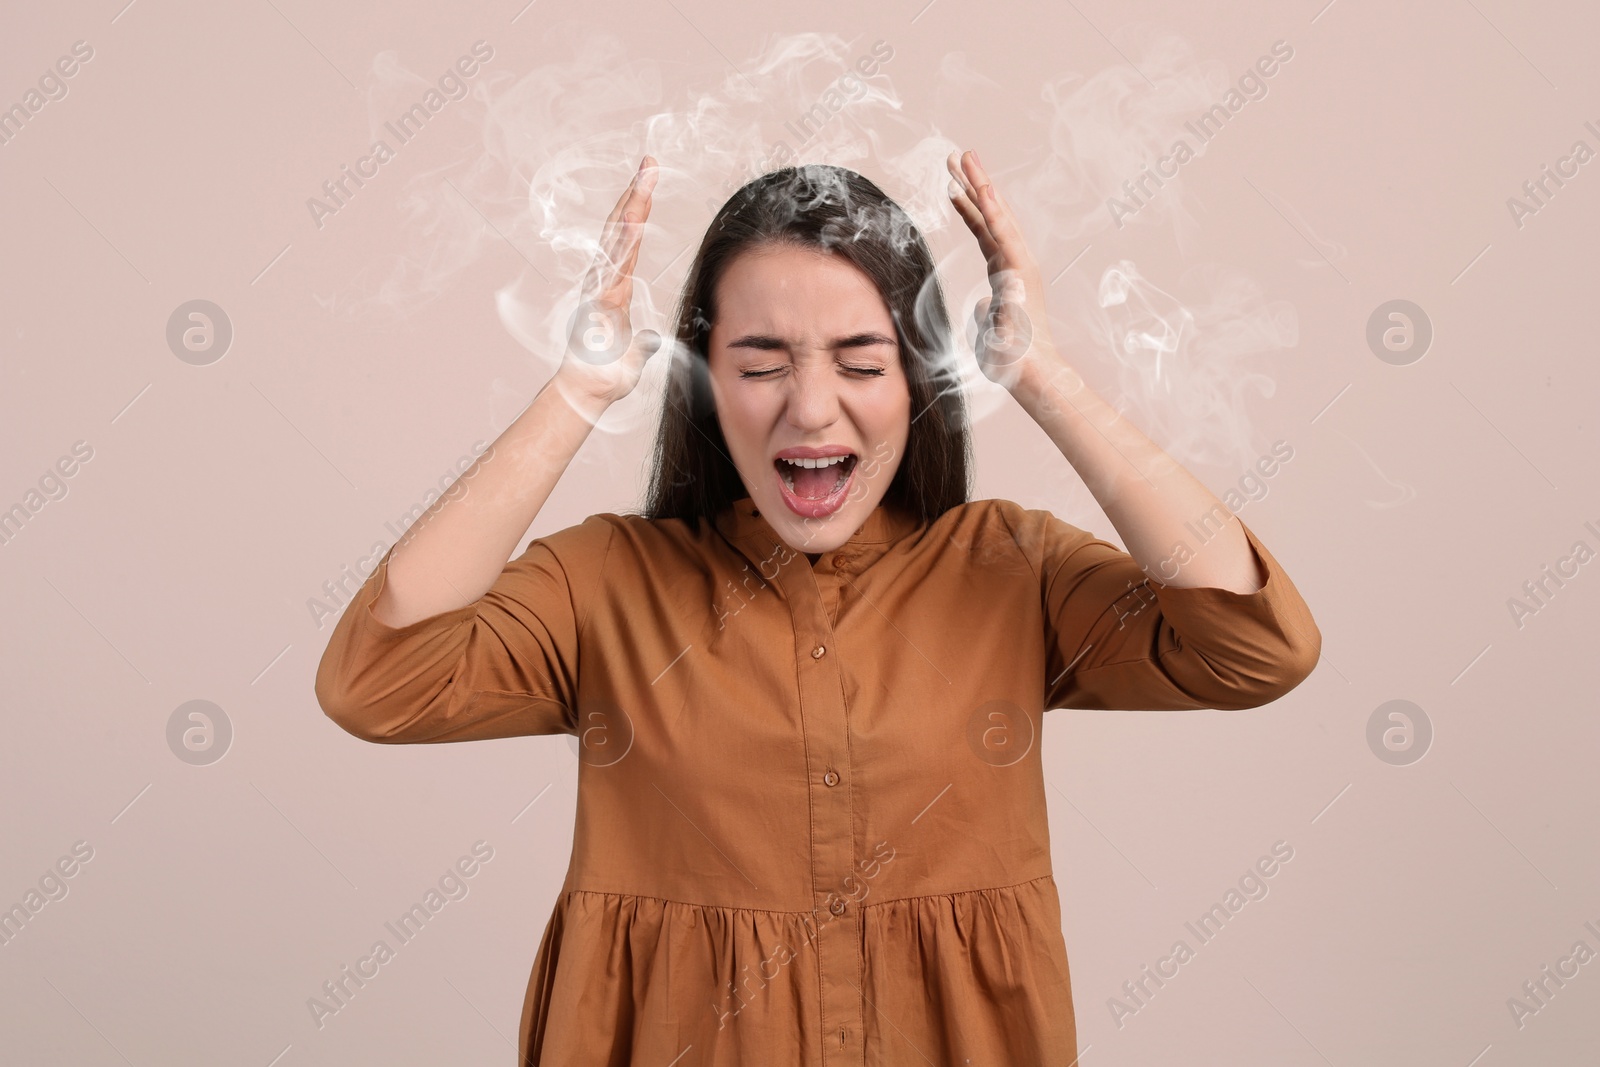 Image of Stressed and upset young woman on light background